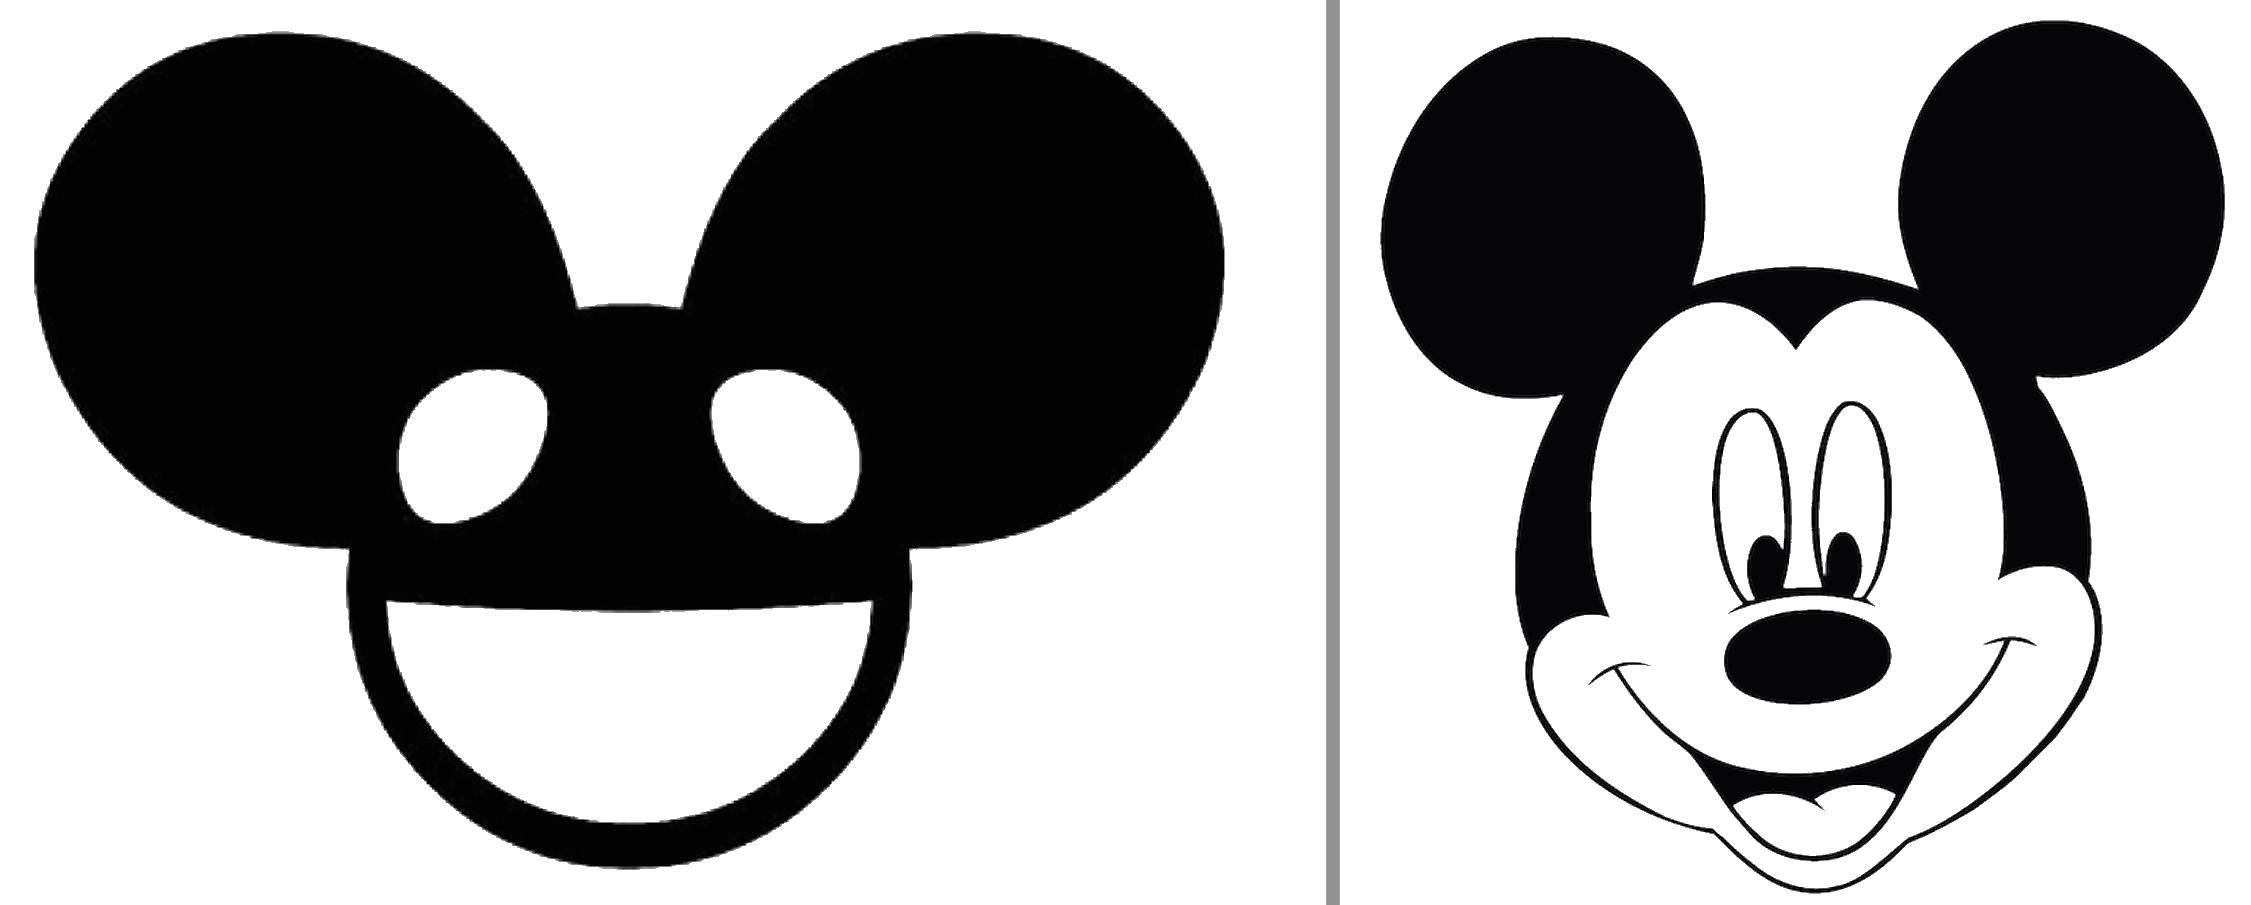 Coloring Mickey mouse. Category cartoons. Tags:  Disney, Mickey Mouse.